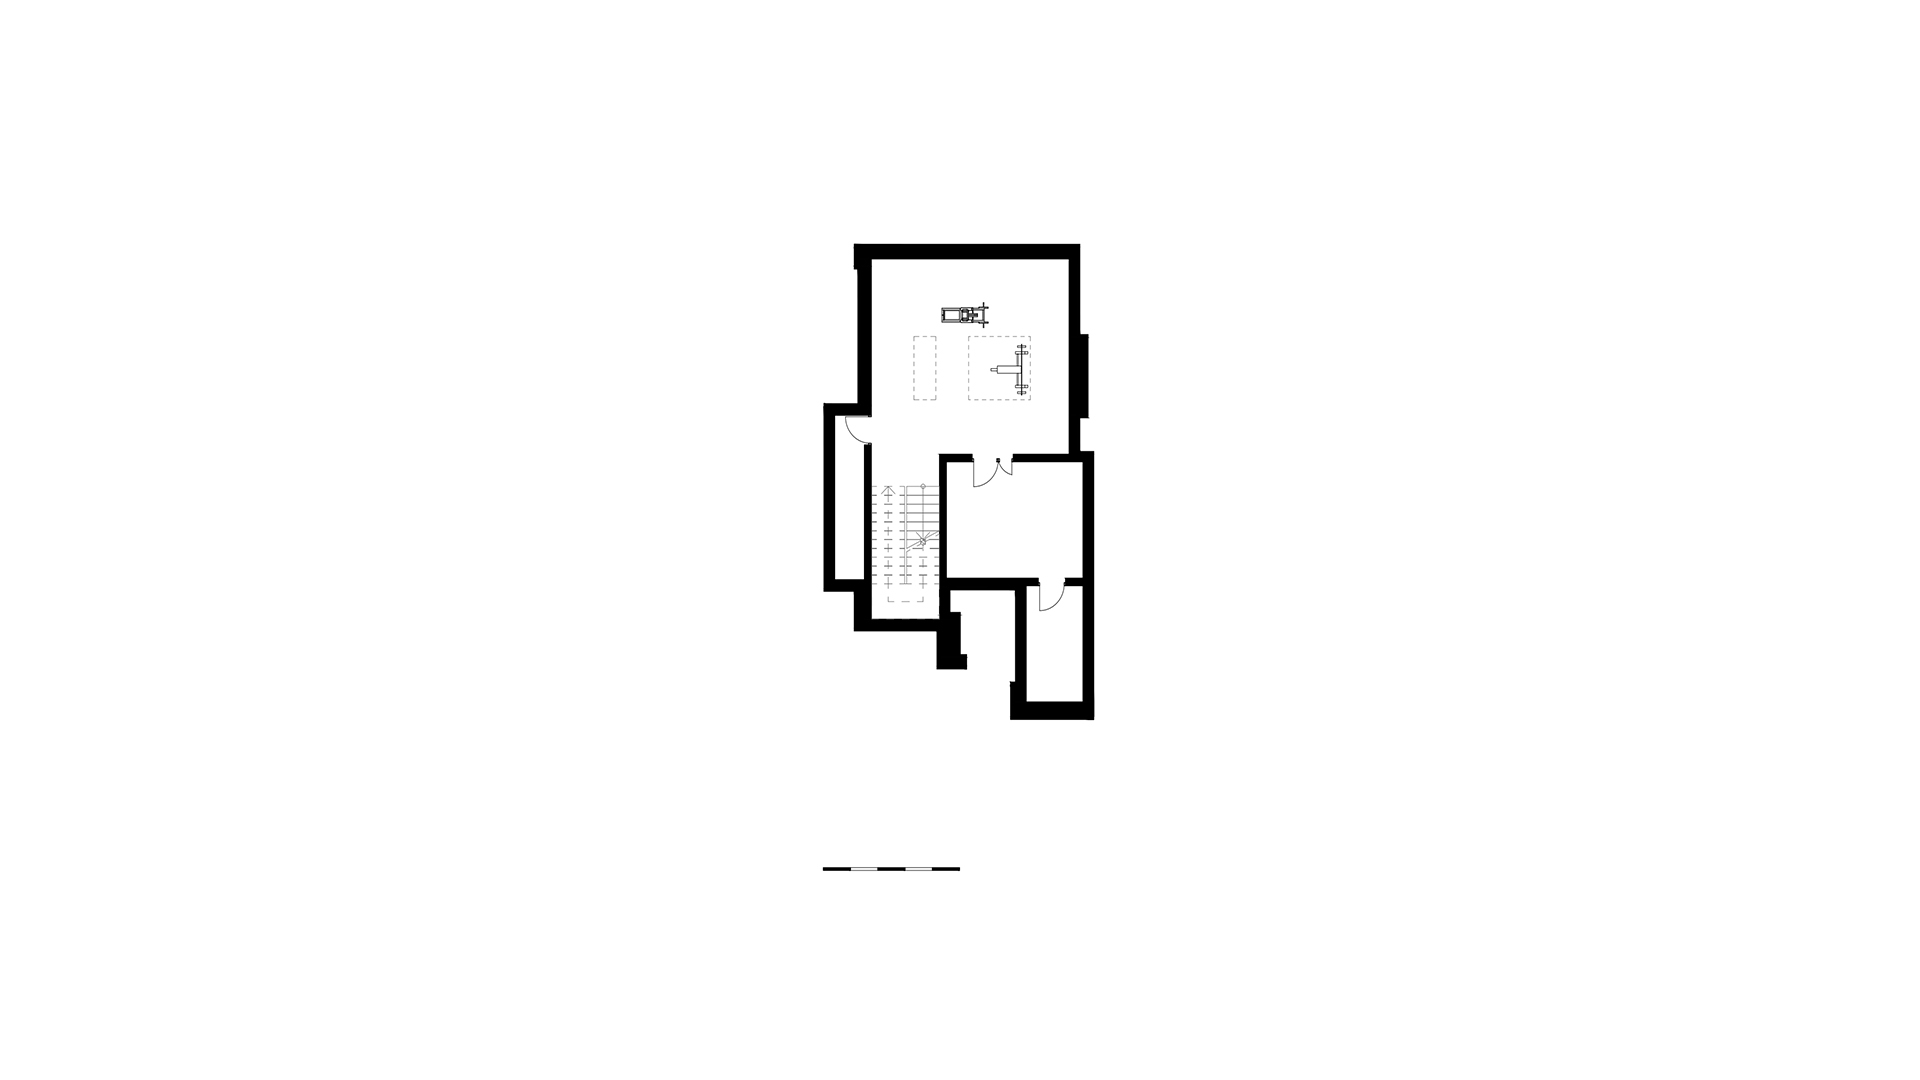 House layout